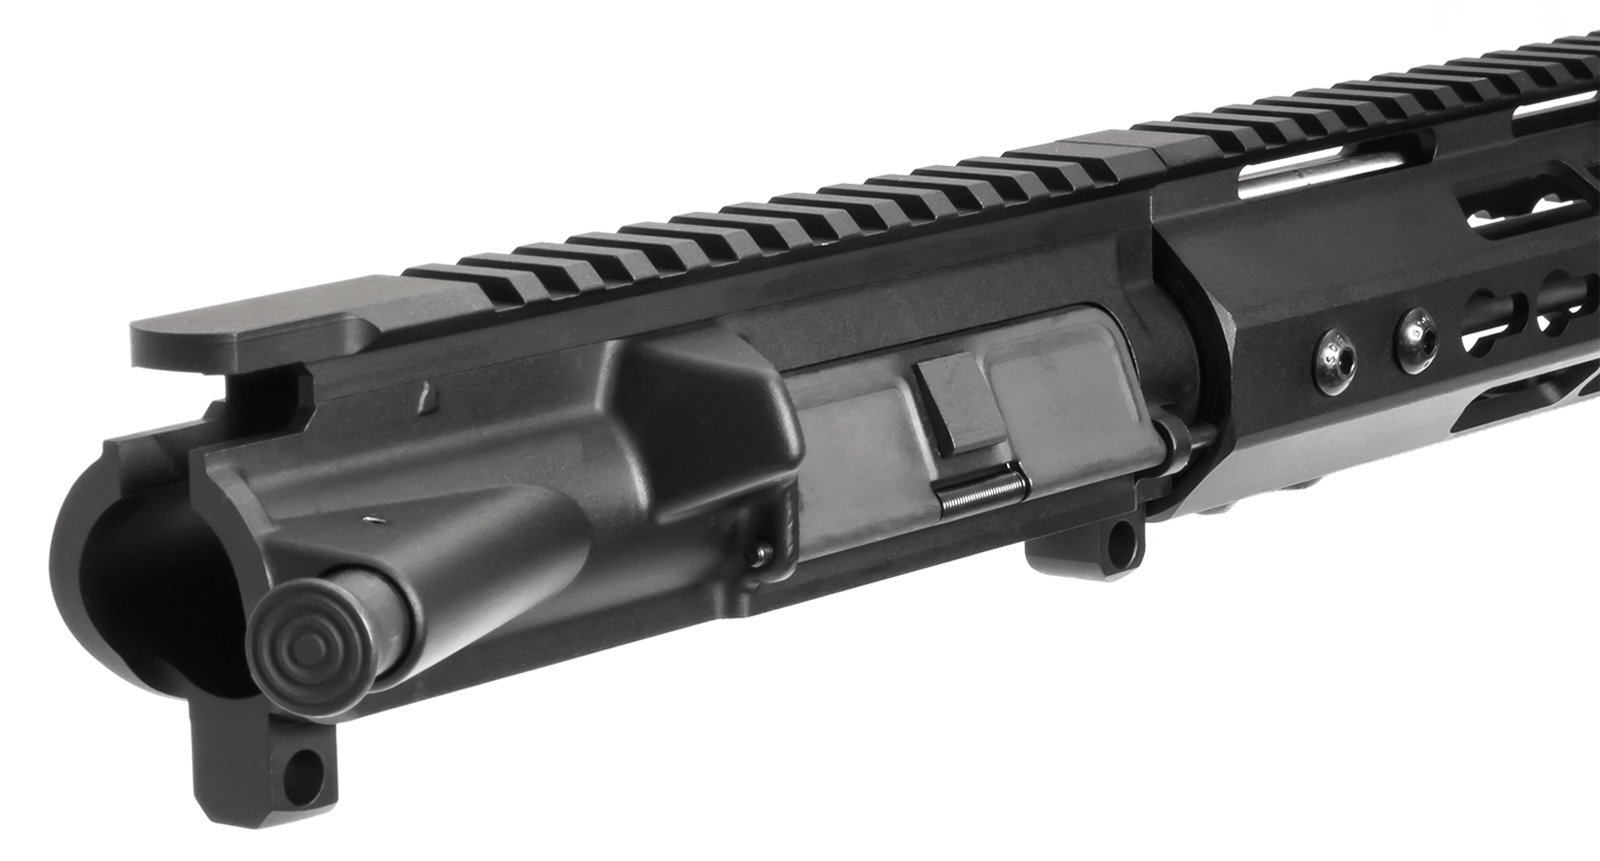 NOTE: Images may not be an exact representation of the product. ar-15-upper-assembly-16-5-56-...